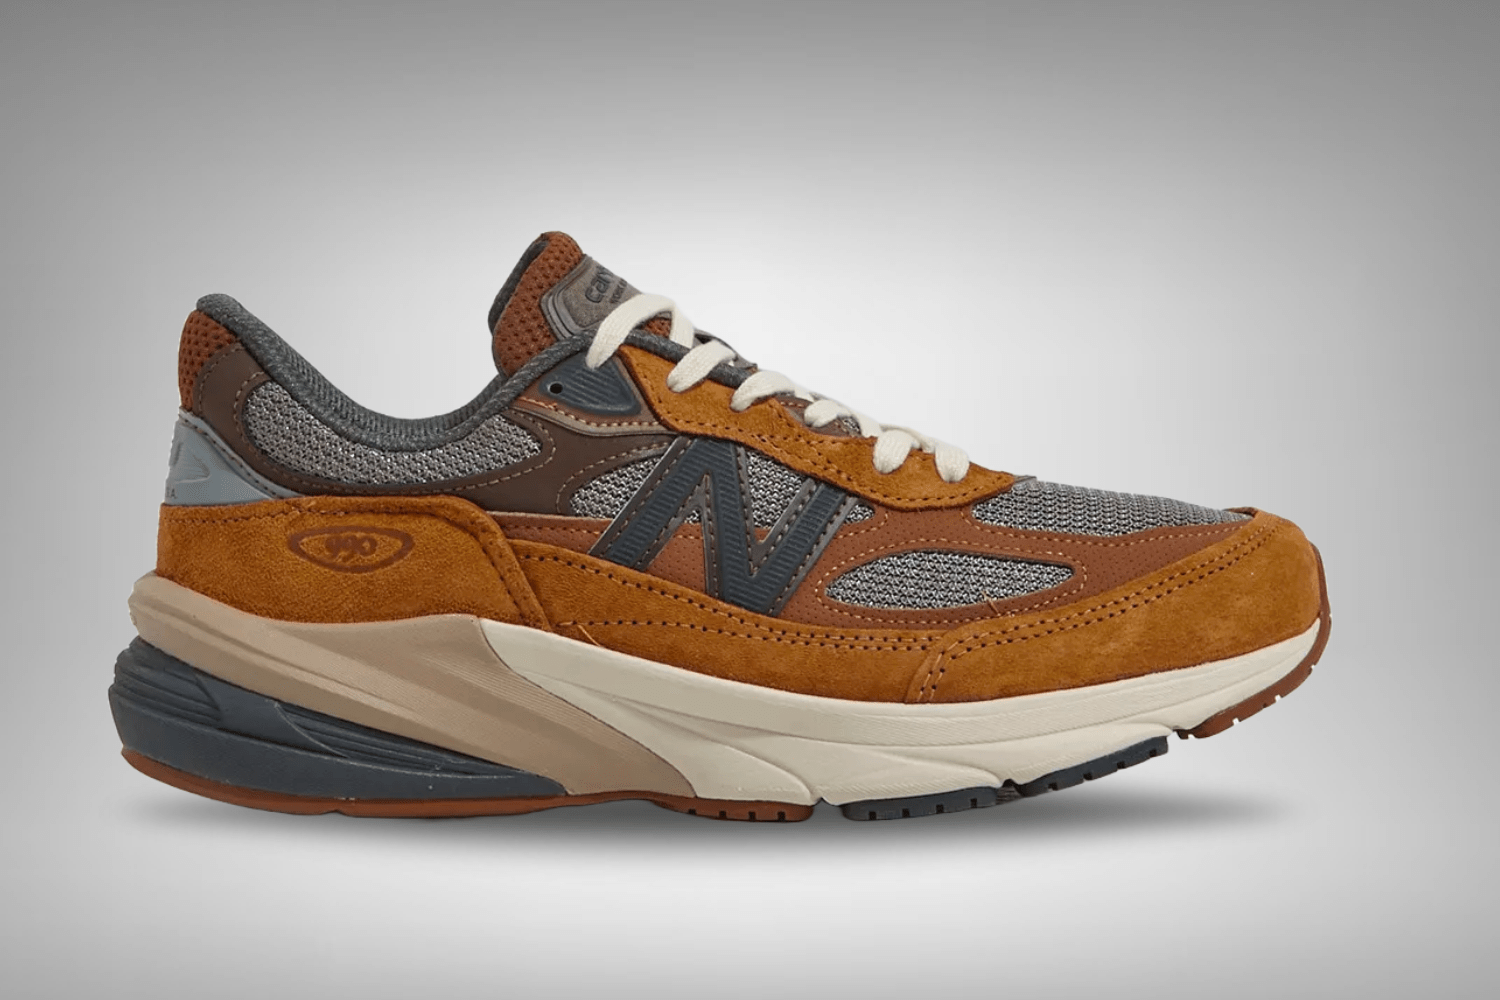 The Carhartt WIP x New Balance 990v6 takes inspiration from local gyms